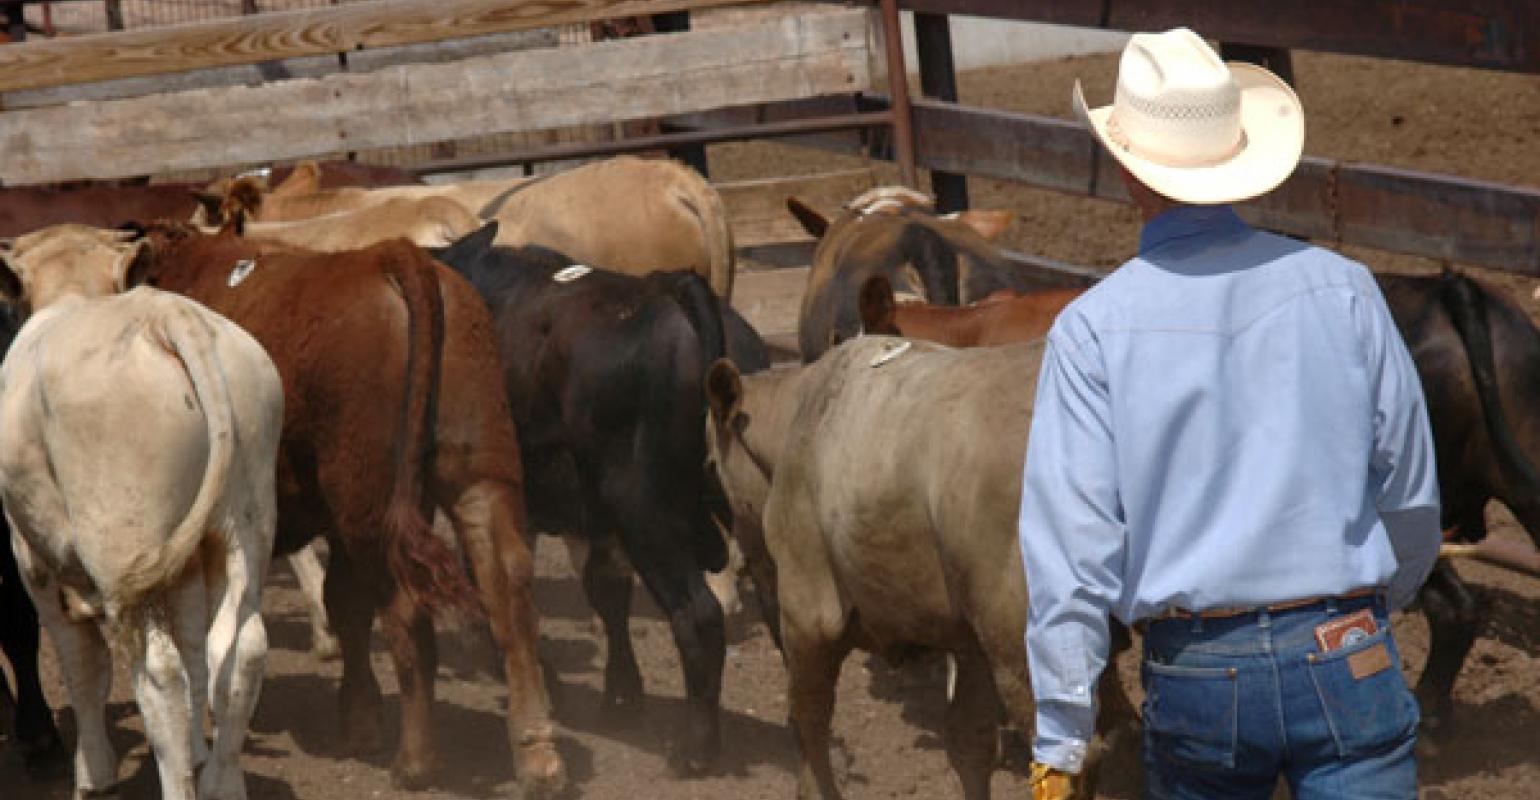 Cowboys working cattles